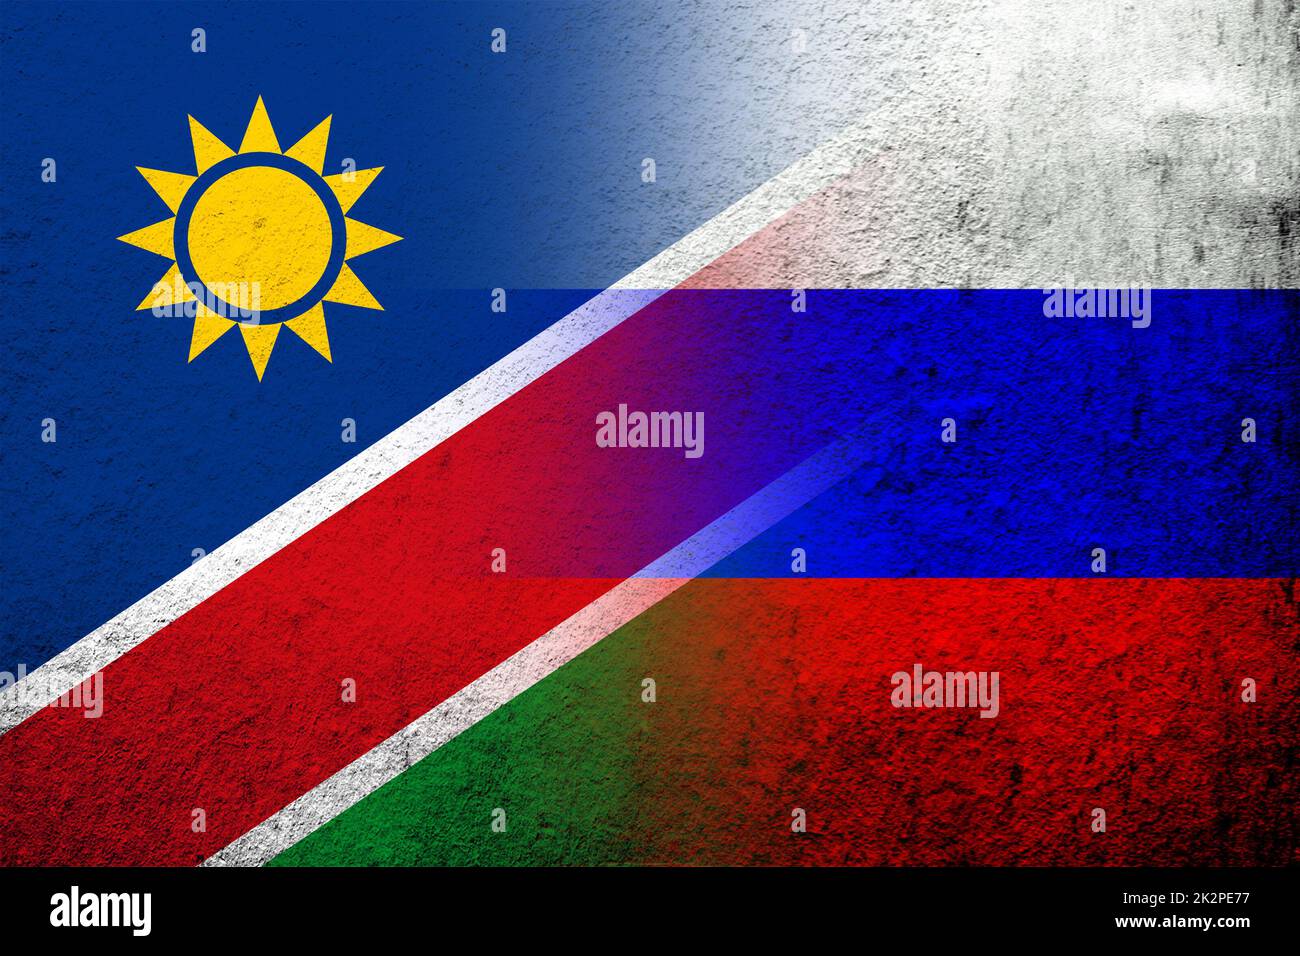 National flag of Russian Federation with The Republic of Namibia National flag. Grunge background Stock Photo